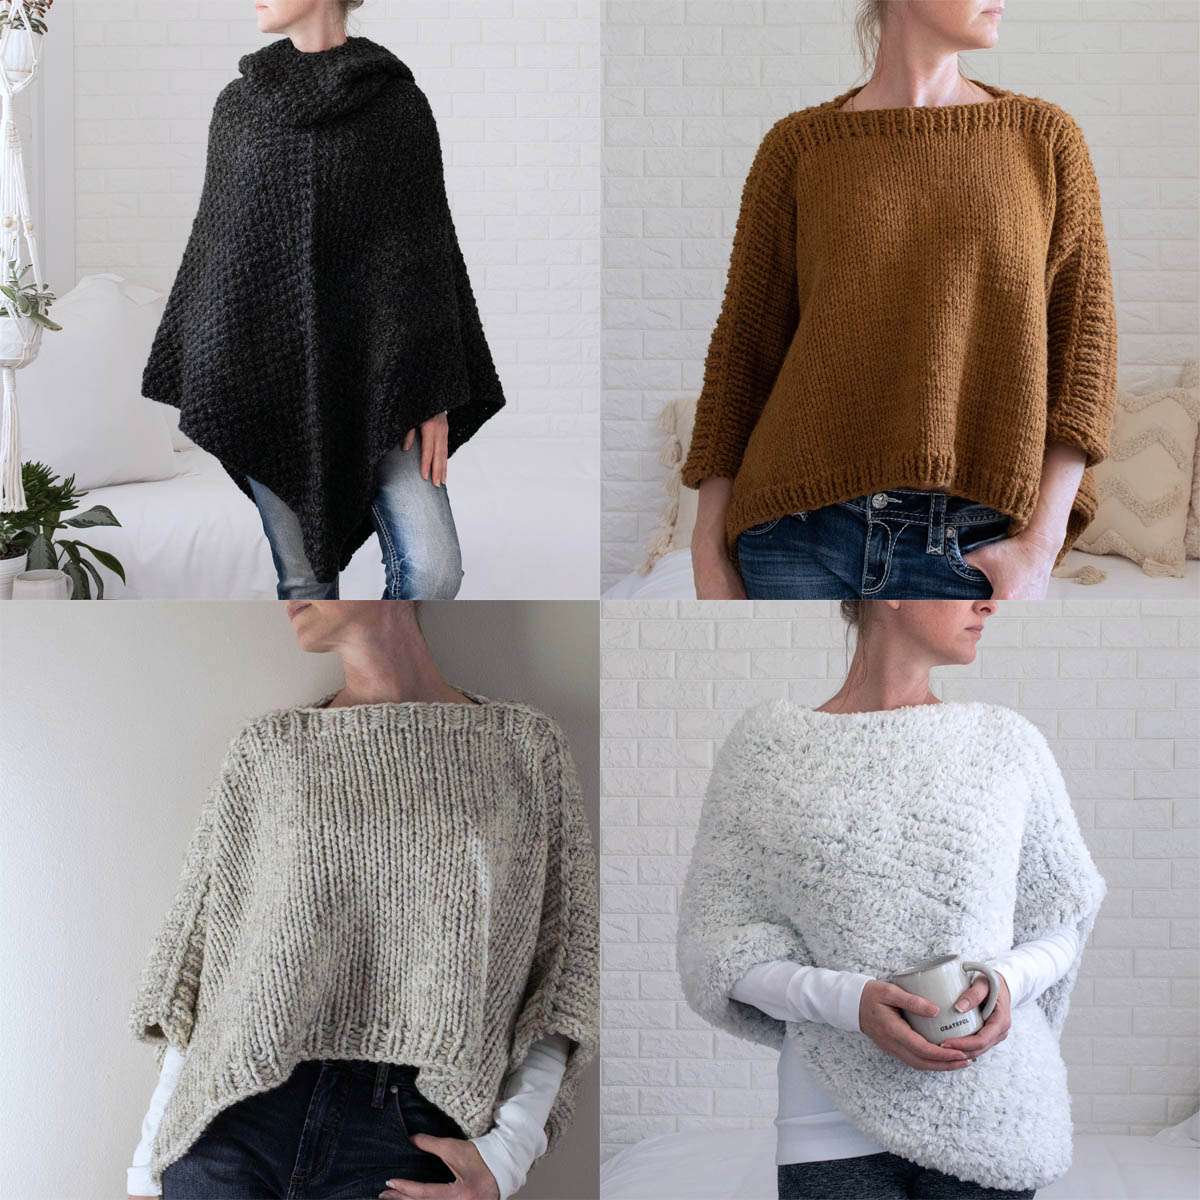 Knitted Poncho Patterns With Video Tutorial For Beginners Advanced  Poncho  knitting patterns, Chunky knitting patterns, Knitted poncho